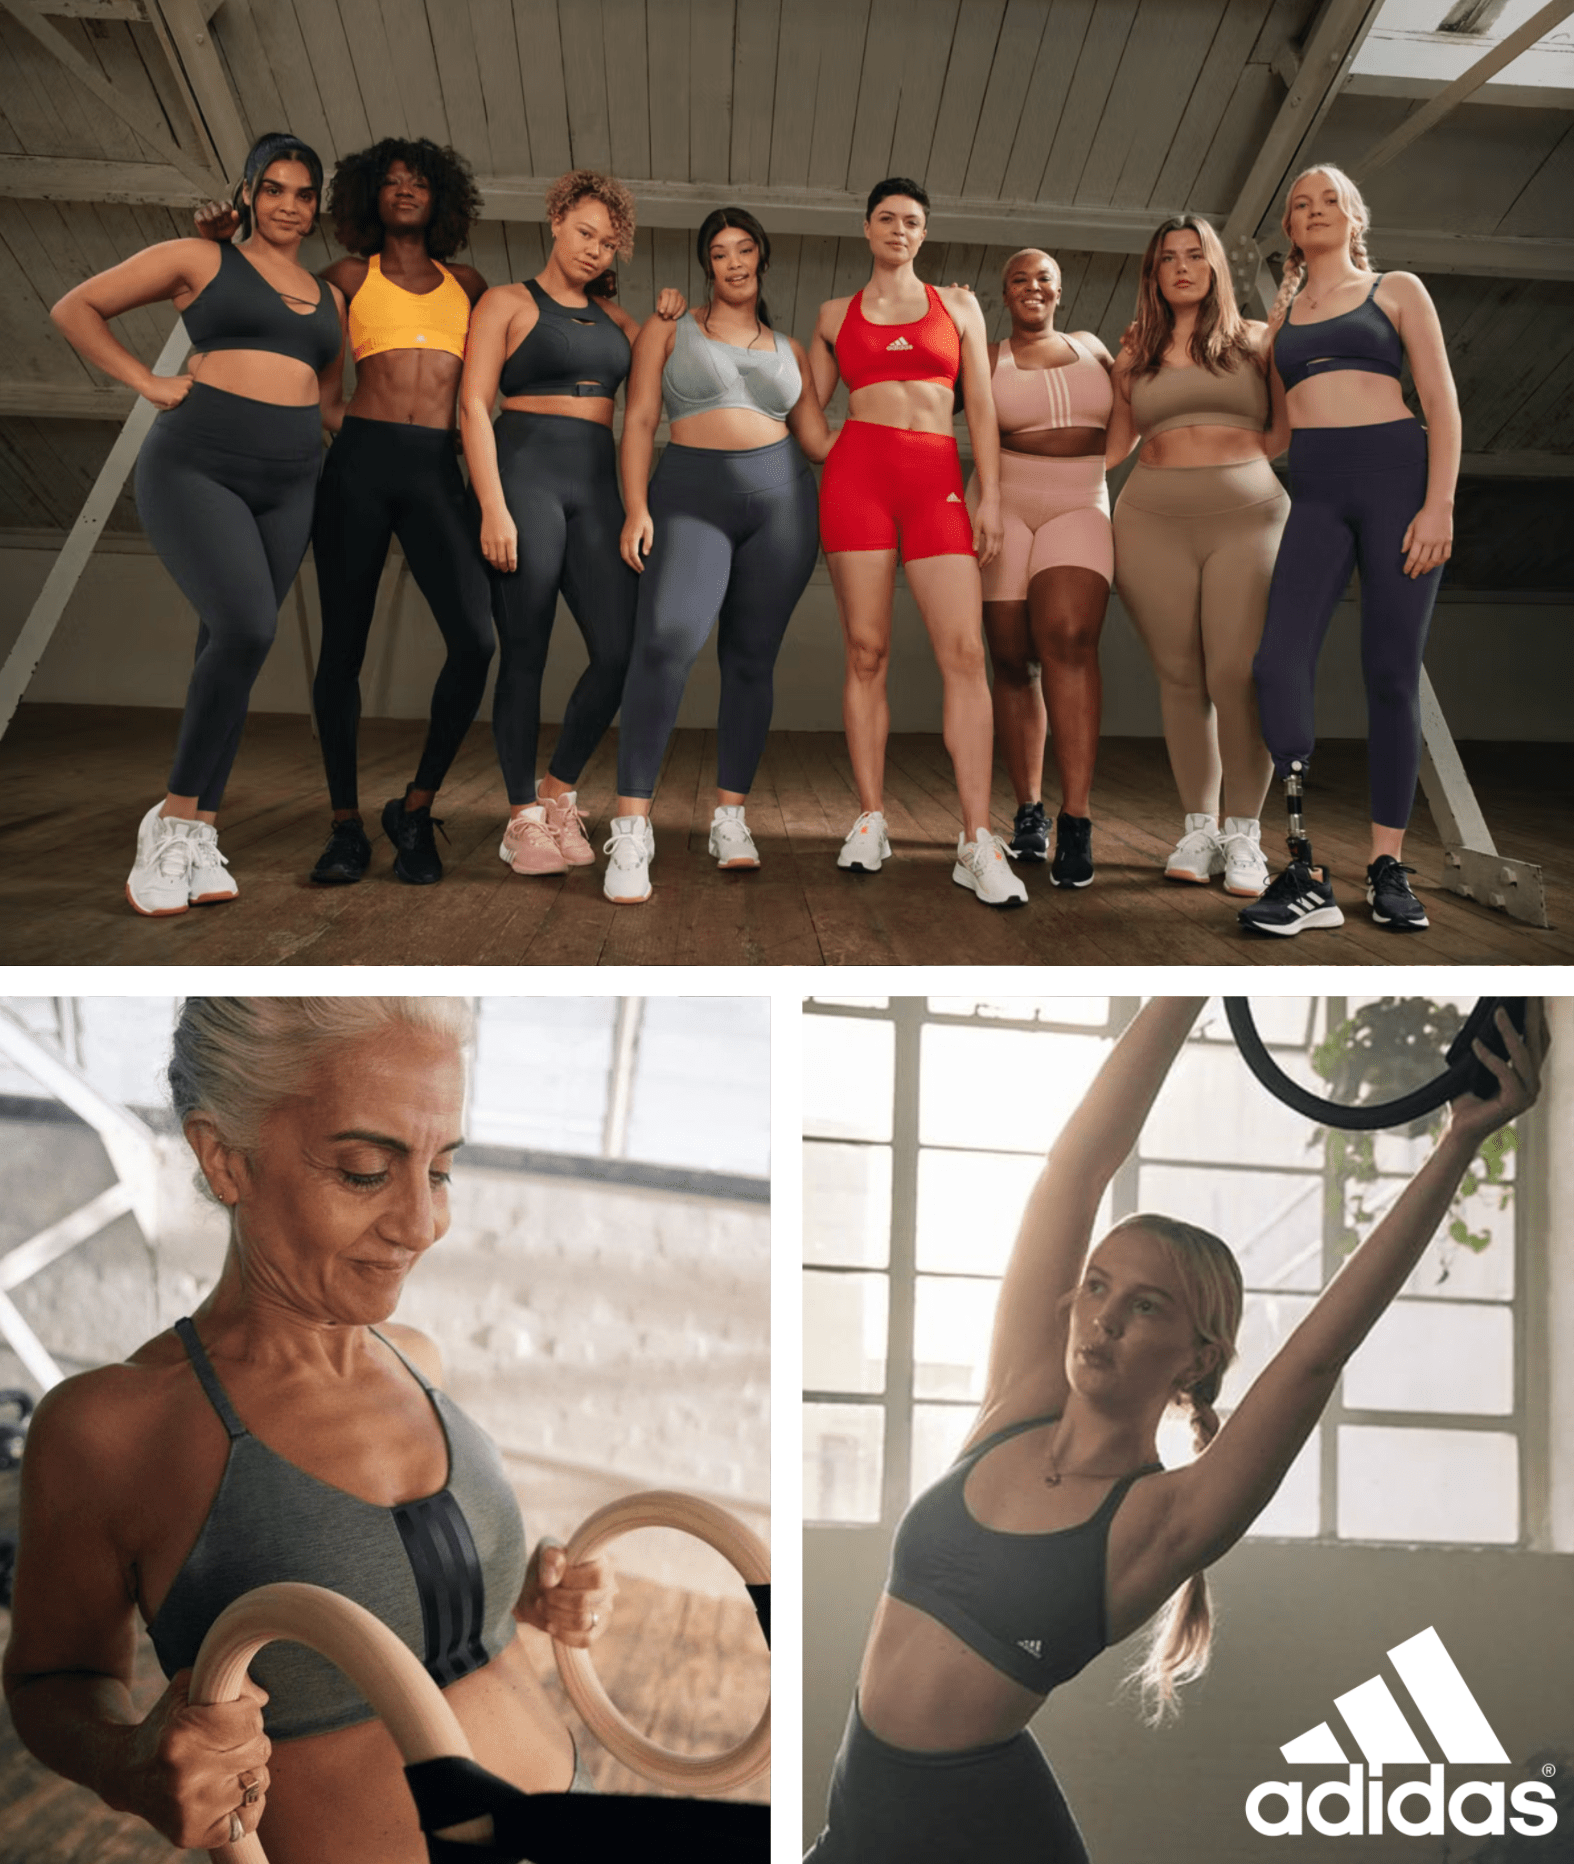 Female Models for Adidas Sports Bra Campaign